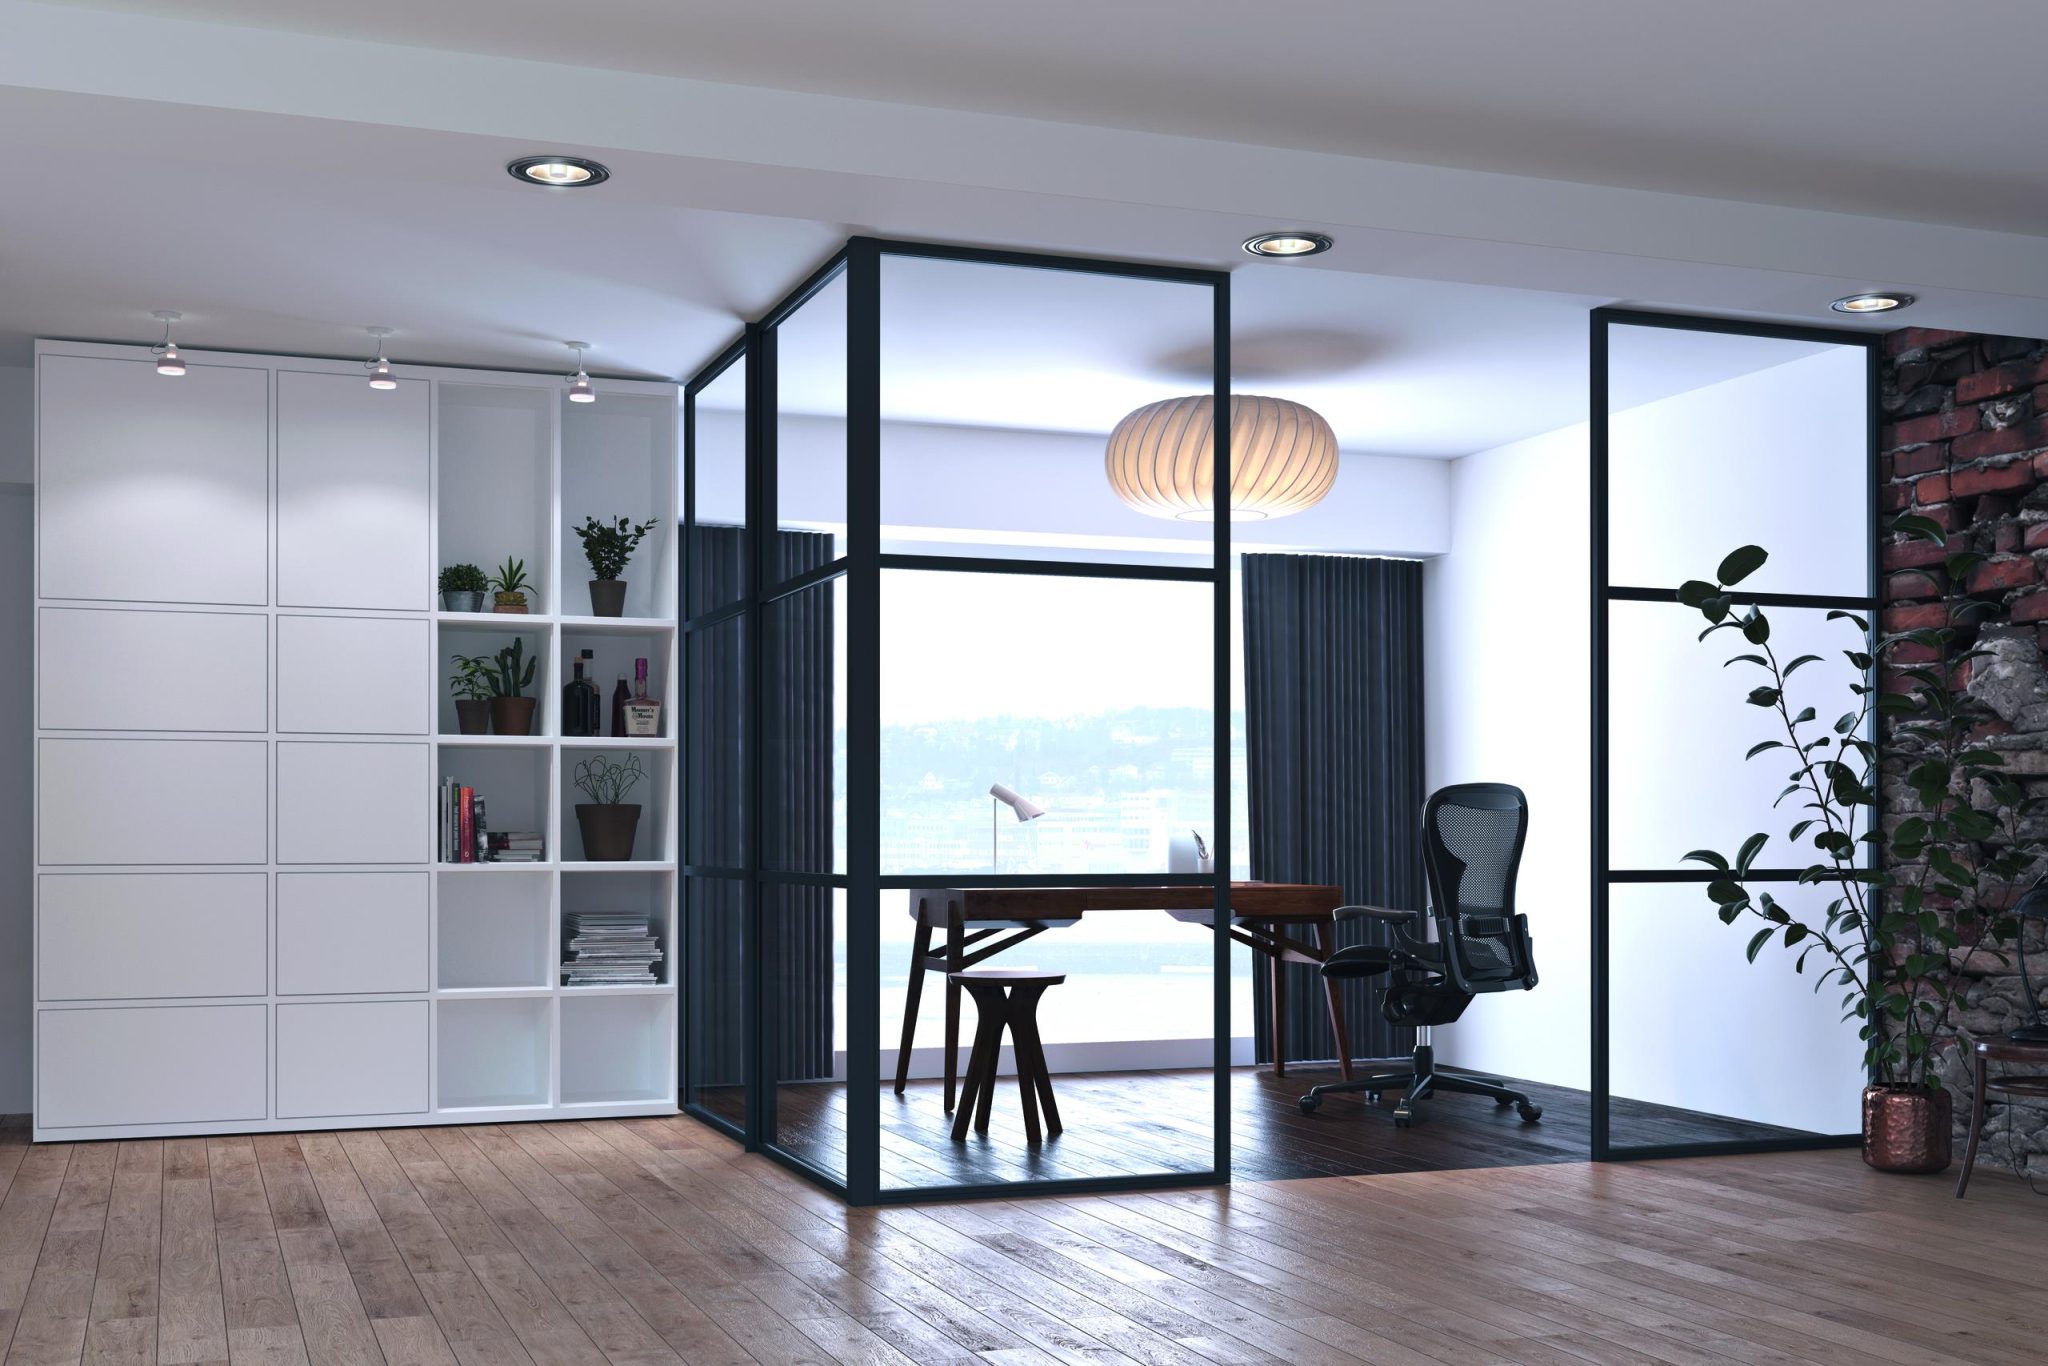 AluSpace used as a home office divider